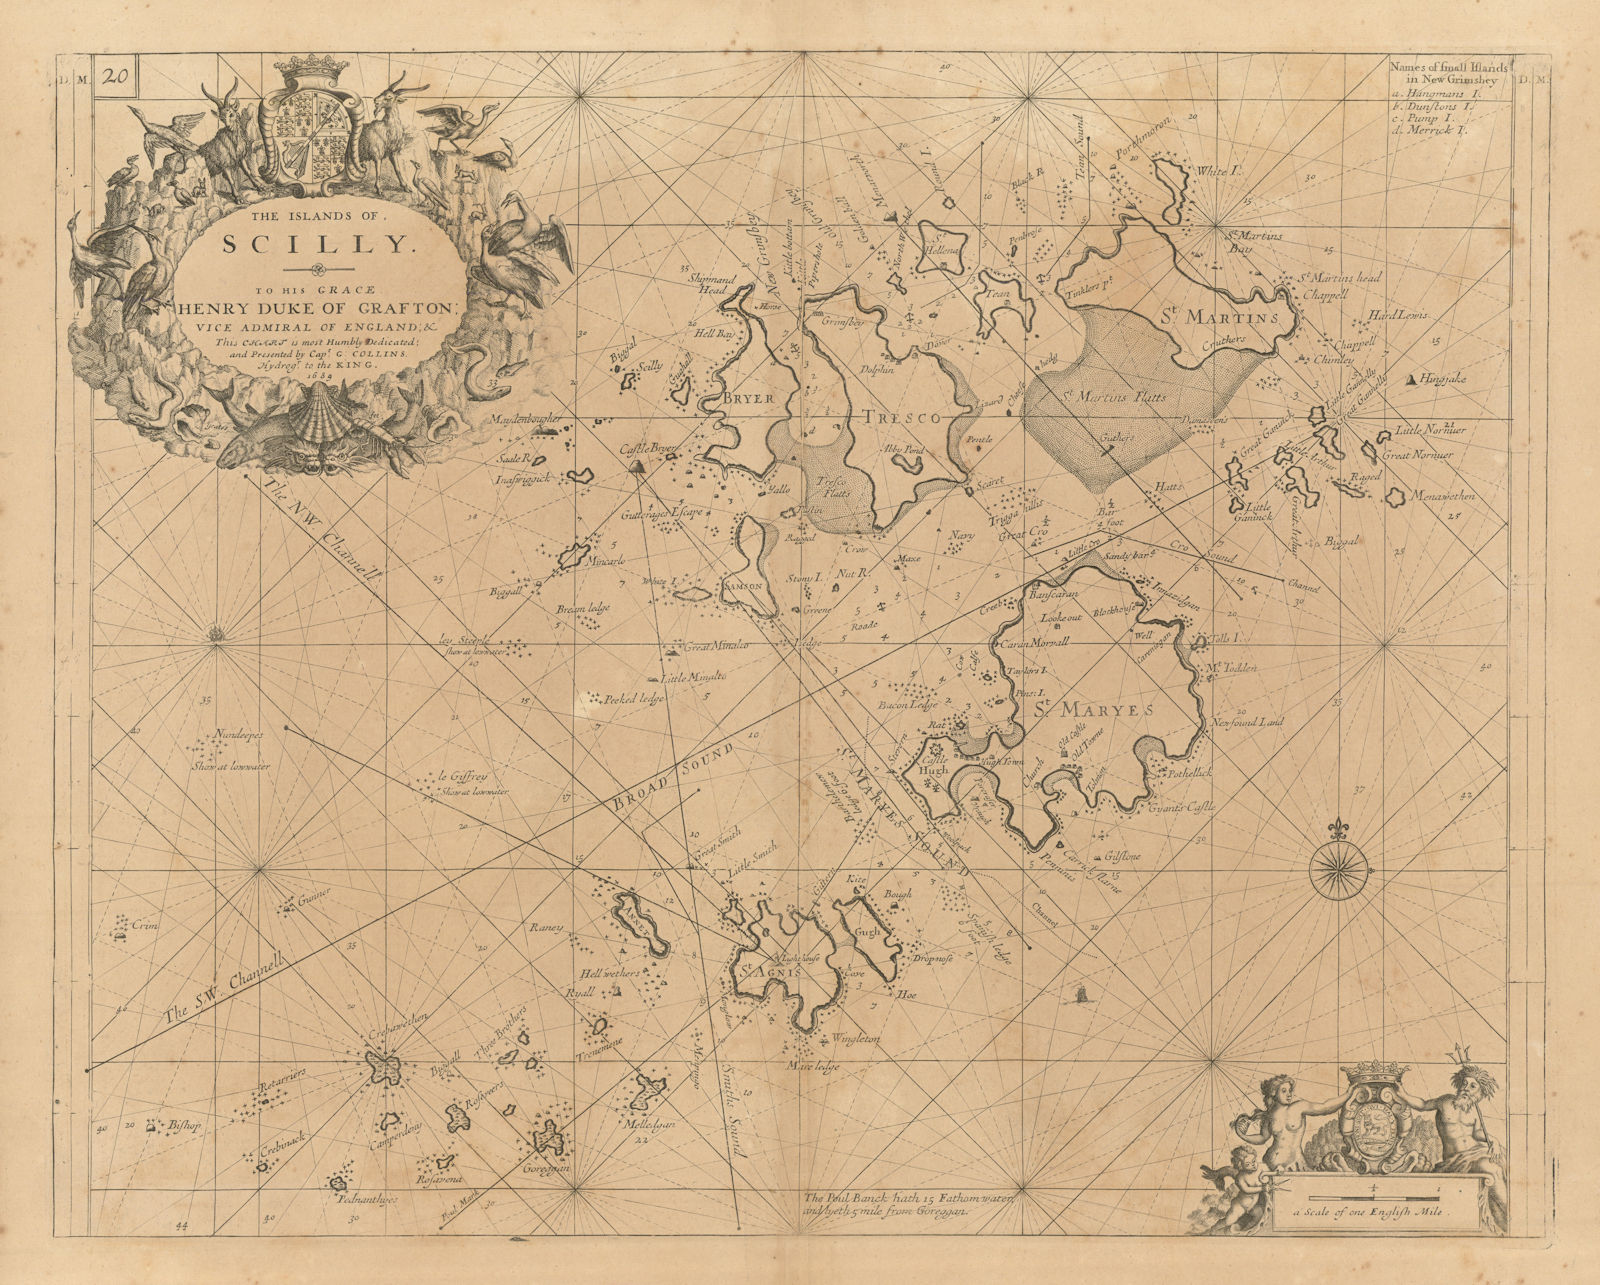 Associate Product THE ISLANDS OF SCILLY sea chart by Captain Greenvile. COLLINS 1693 old map